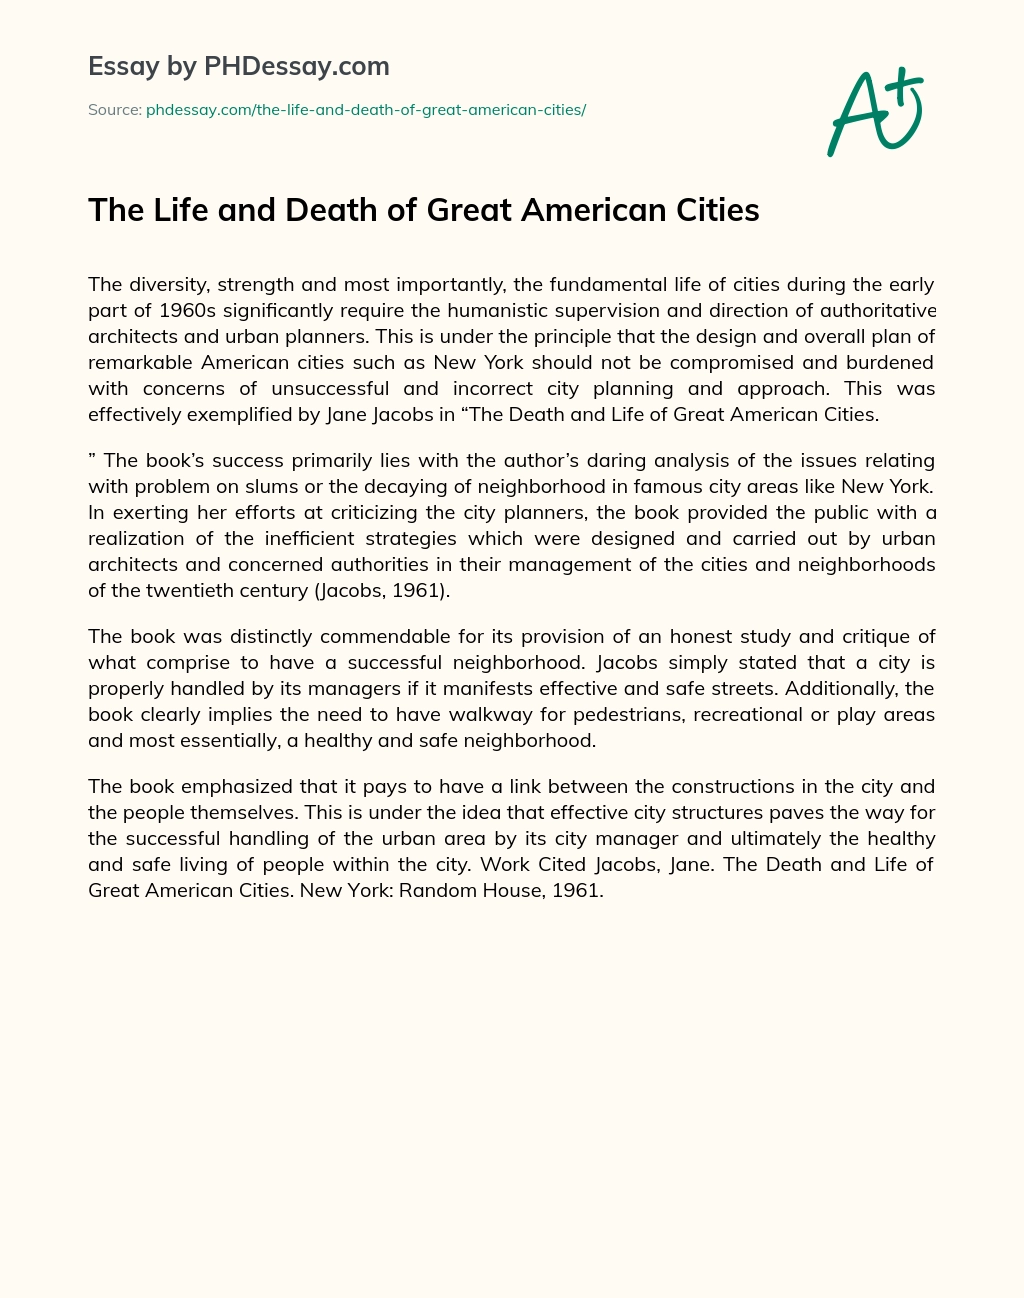 The Life and Death of Great American Cities essay